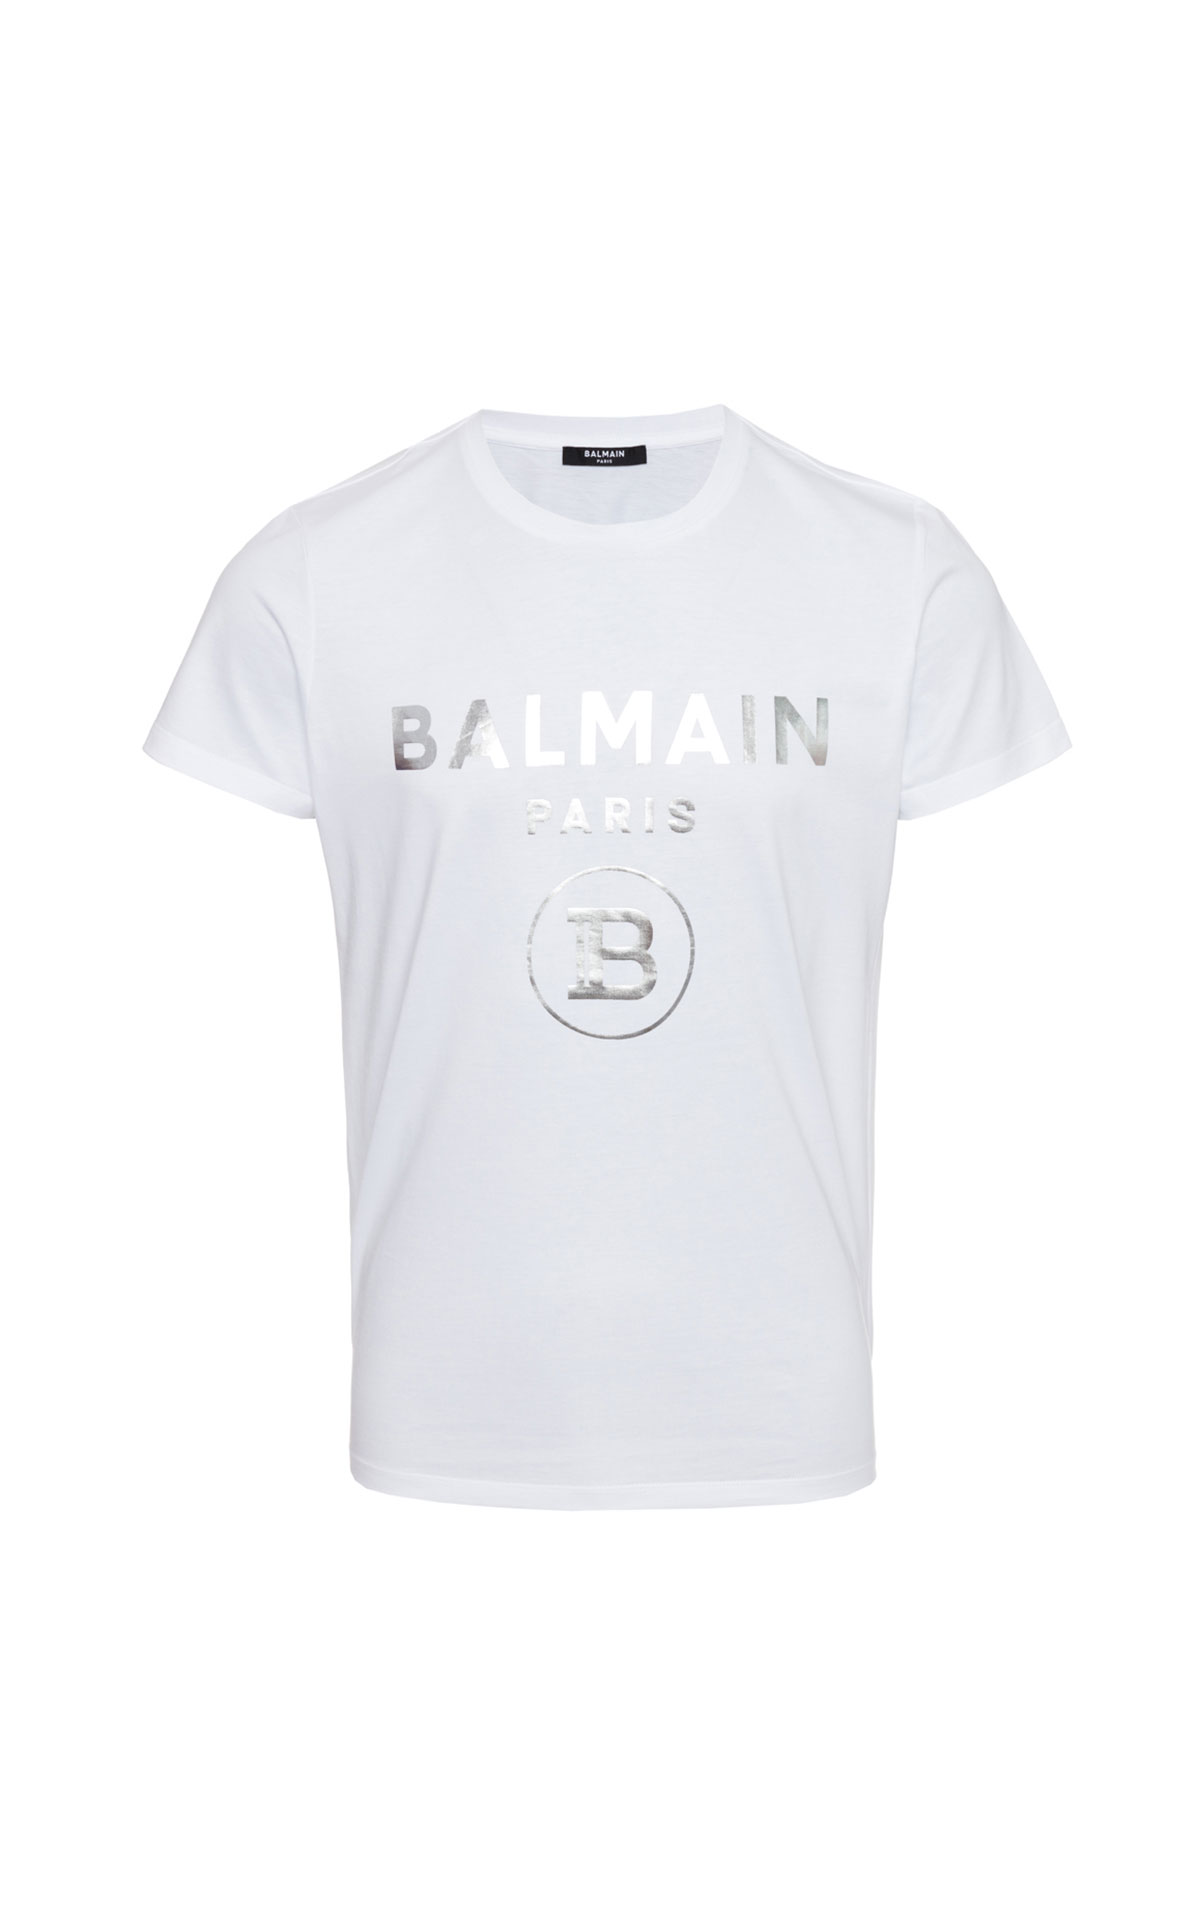 Balmain Tee with silver foil logo from Bicester Village